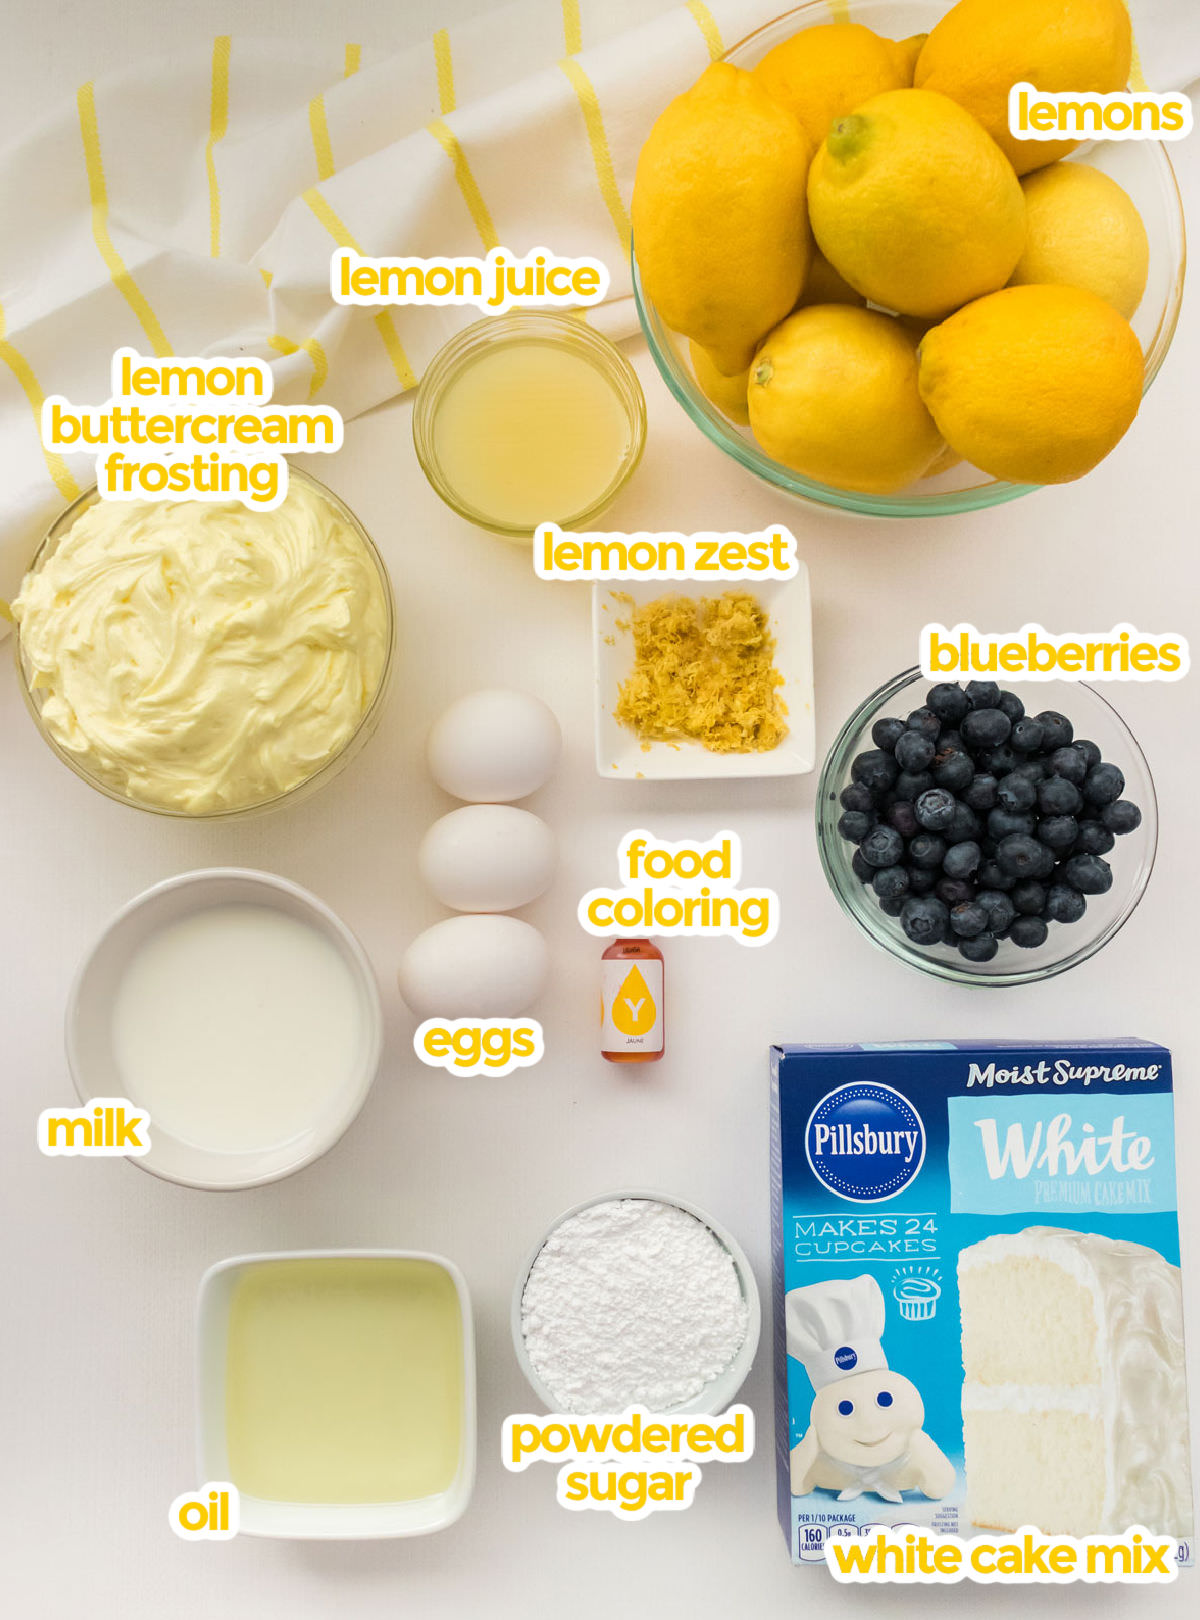 All the ingredients you will need to make Lemon Blueberry Cupcakes including lemons, lemon juice, lemon zest, lemon buttercream frosting, blueberries, milk, oil, eggs, powdered sugar, food coloring and white cake mix.